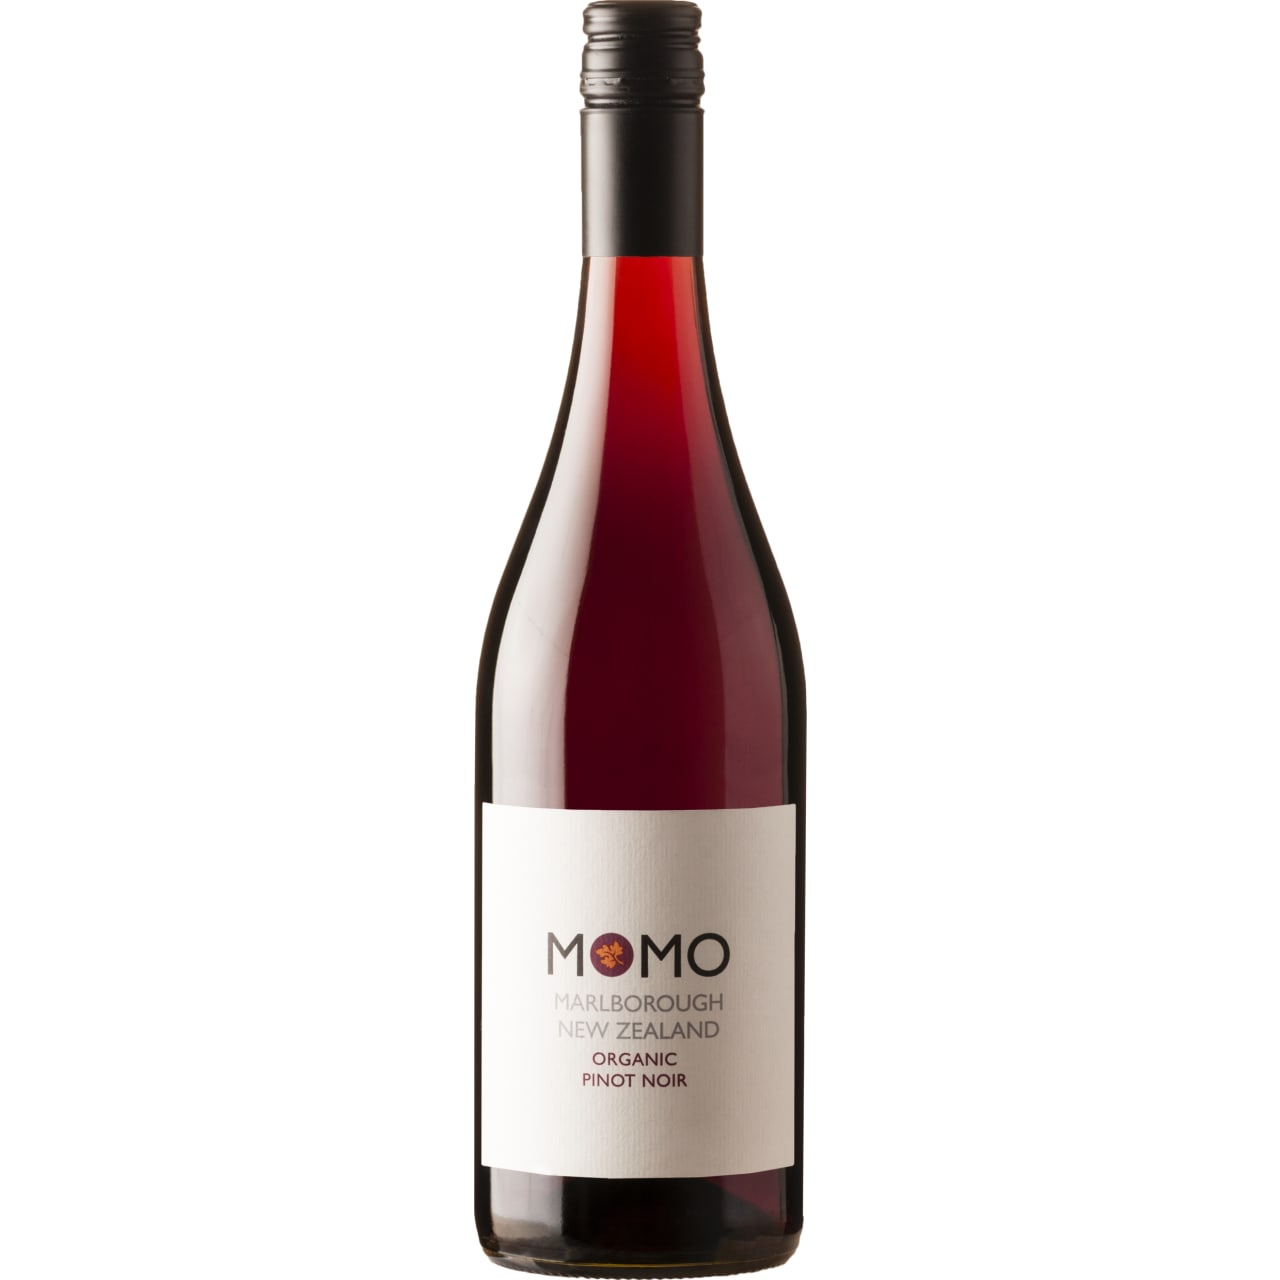 Feminine Pinot Noir exudes lifted aromas of cherry and ripe, red, berry fruits.